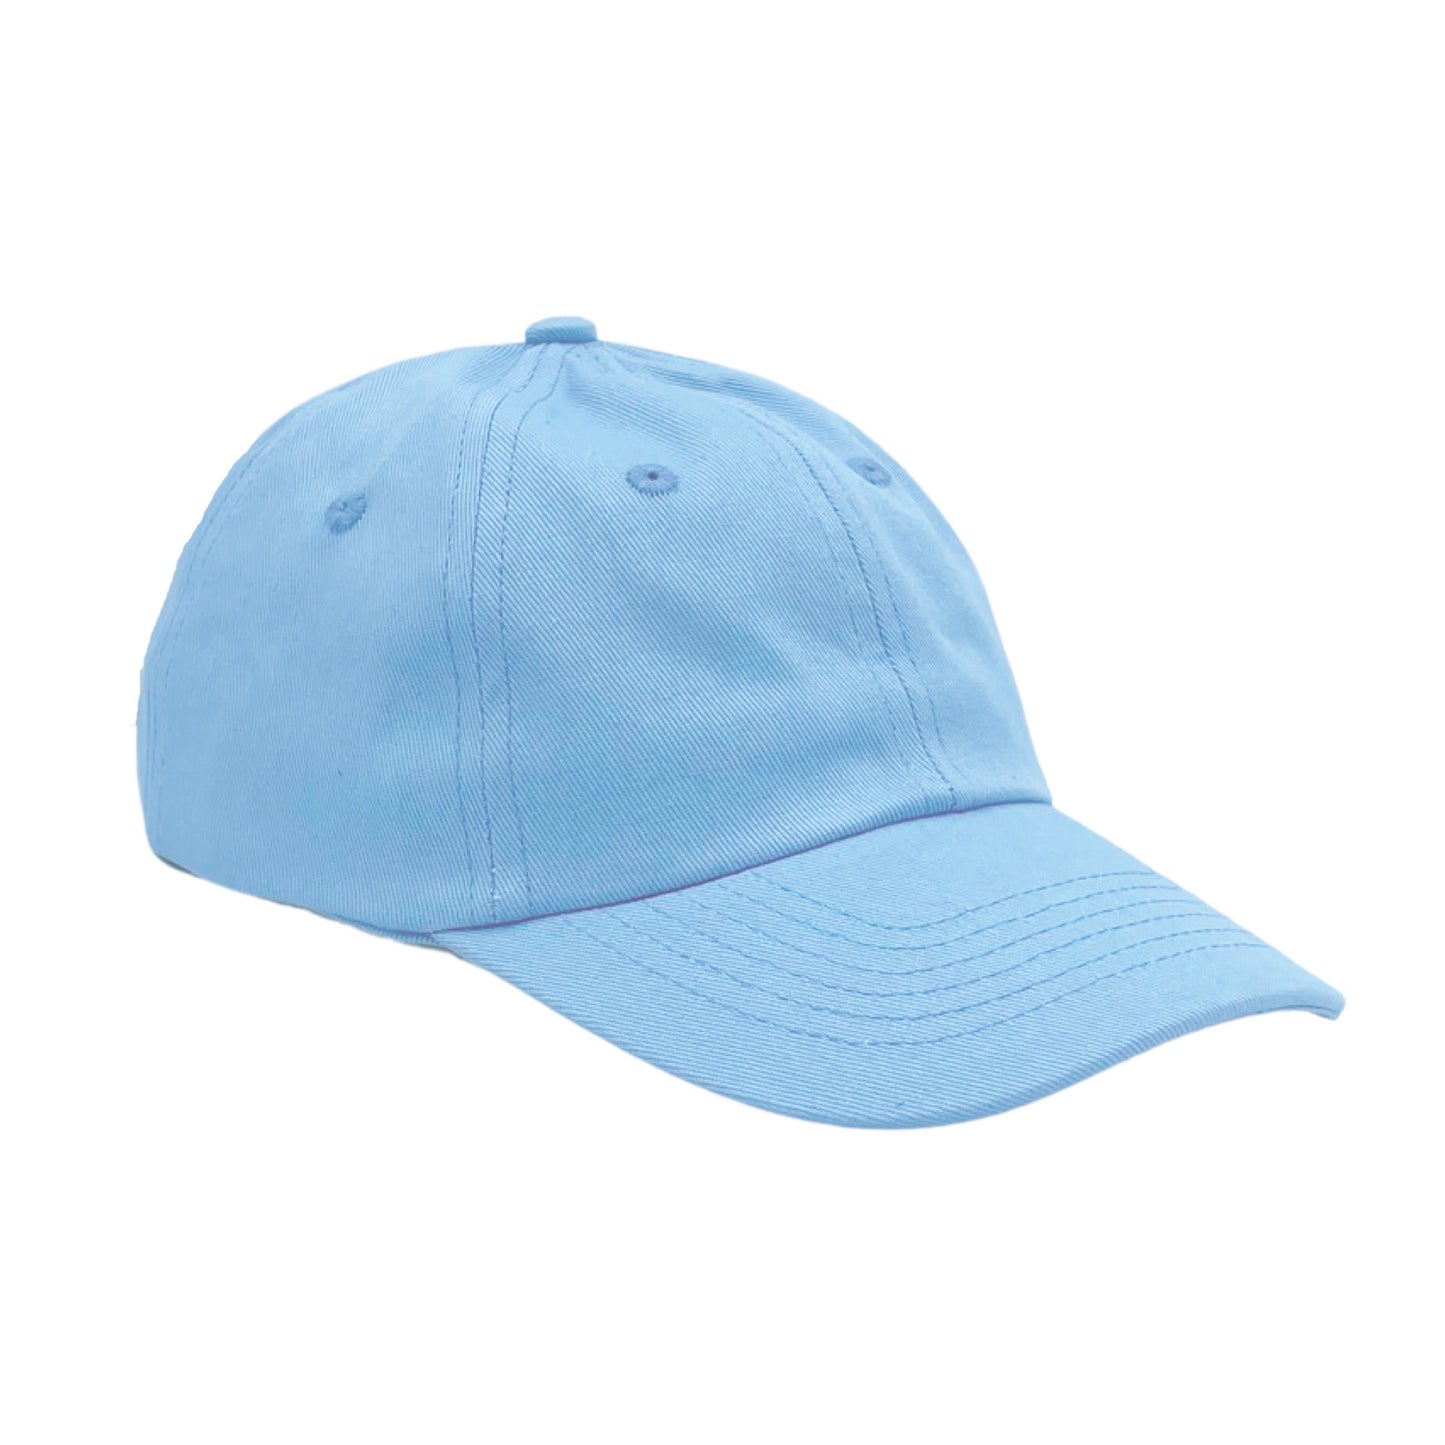 Bits and Bows Customizable Baseball Hat in Birdie Blue (Baby)